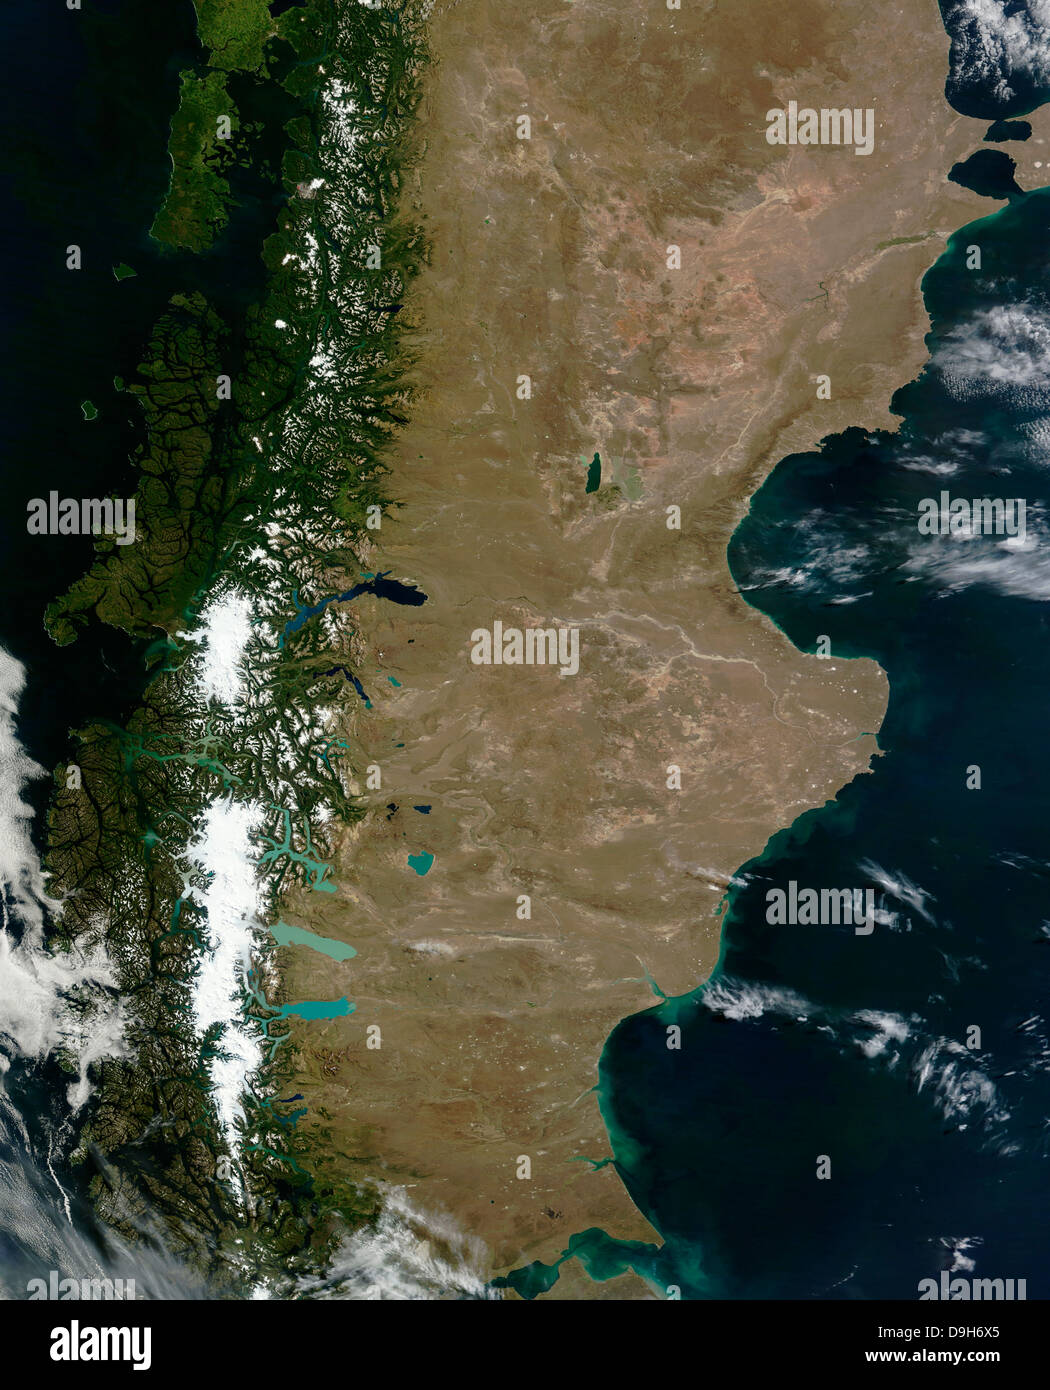 February 19, 2011 - Satellite view of the Patagonia region in South America  Stock Photo - Alamy